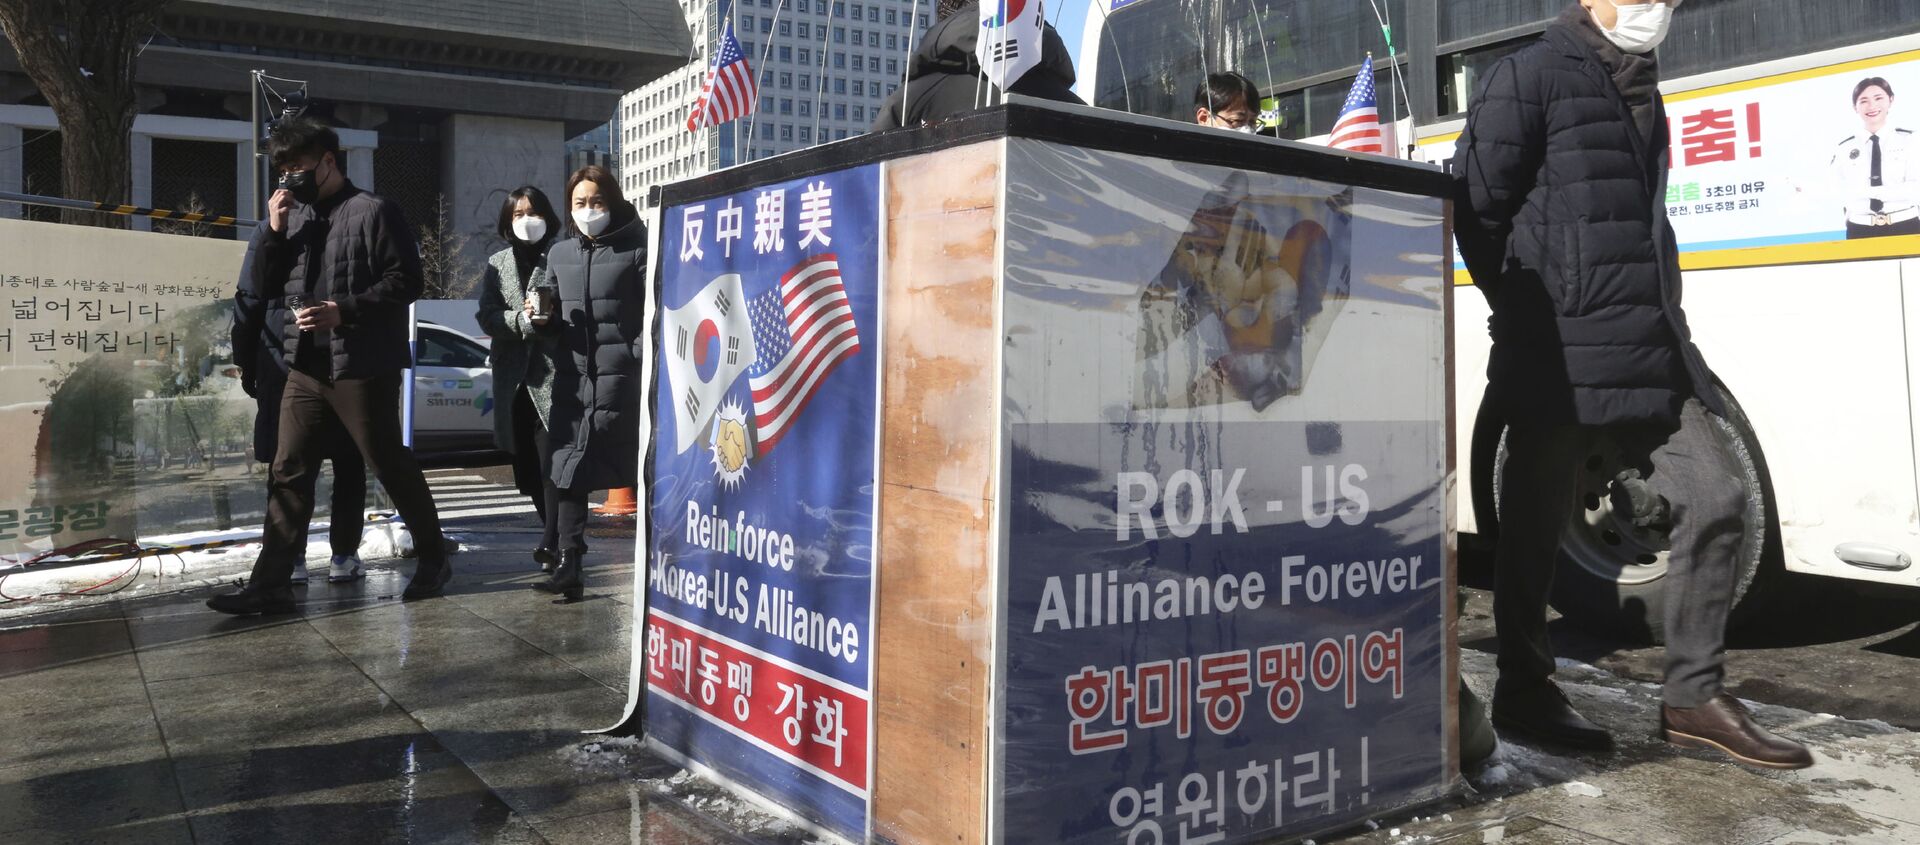 Banners to support the alliance between South Korea and the U.S. are displayed near the U.S. Embassy in Seoul, South Korea, Thursday, Feb. 4, 2021. - Sputnik International, 1920, 08.03.2021